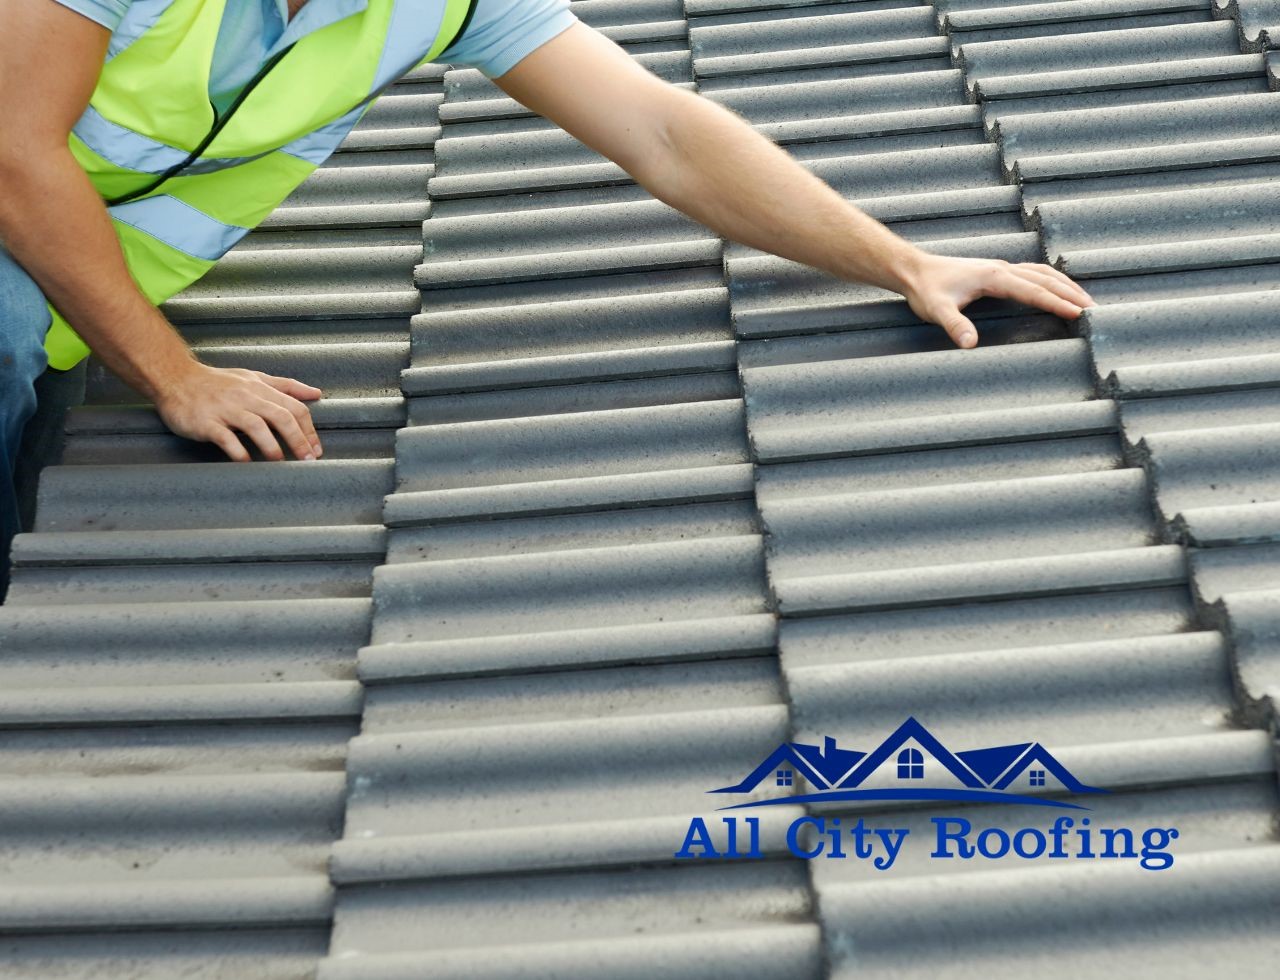 Proper Roof inspection for your Property